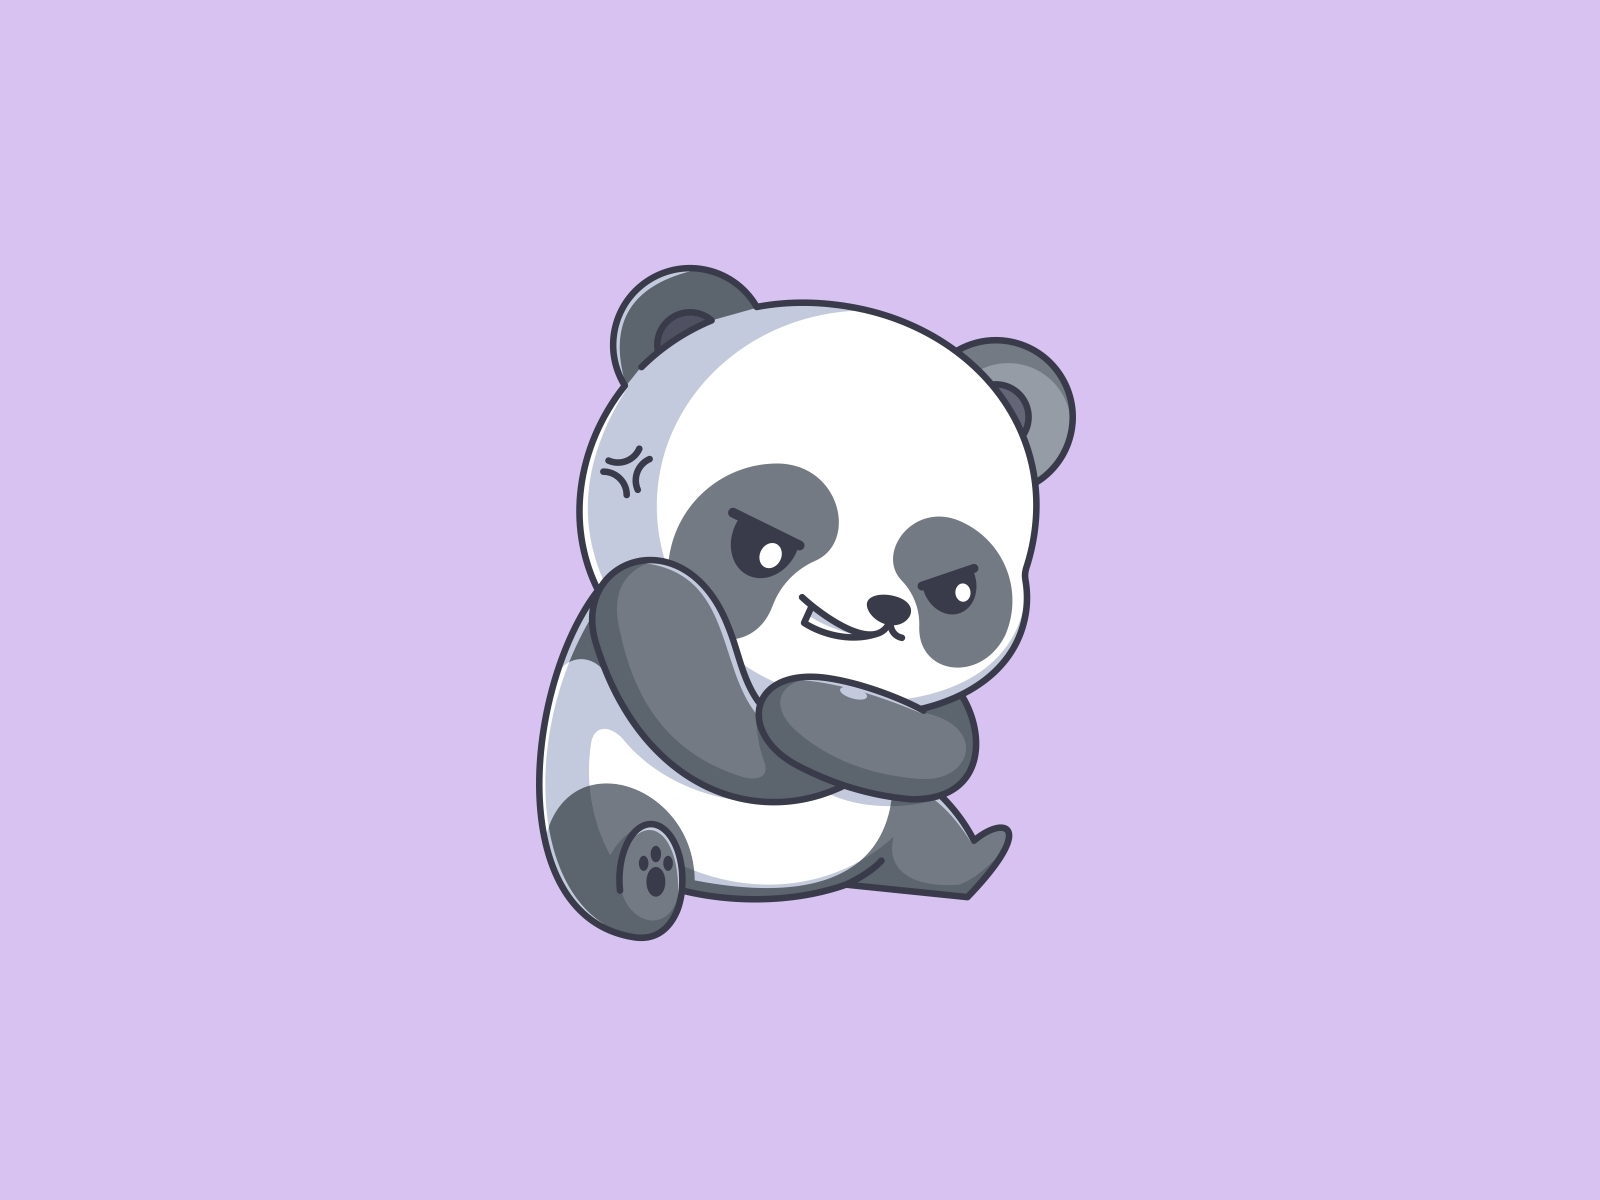 Panda angry by wawadzgn on Dribbble